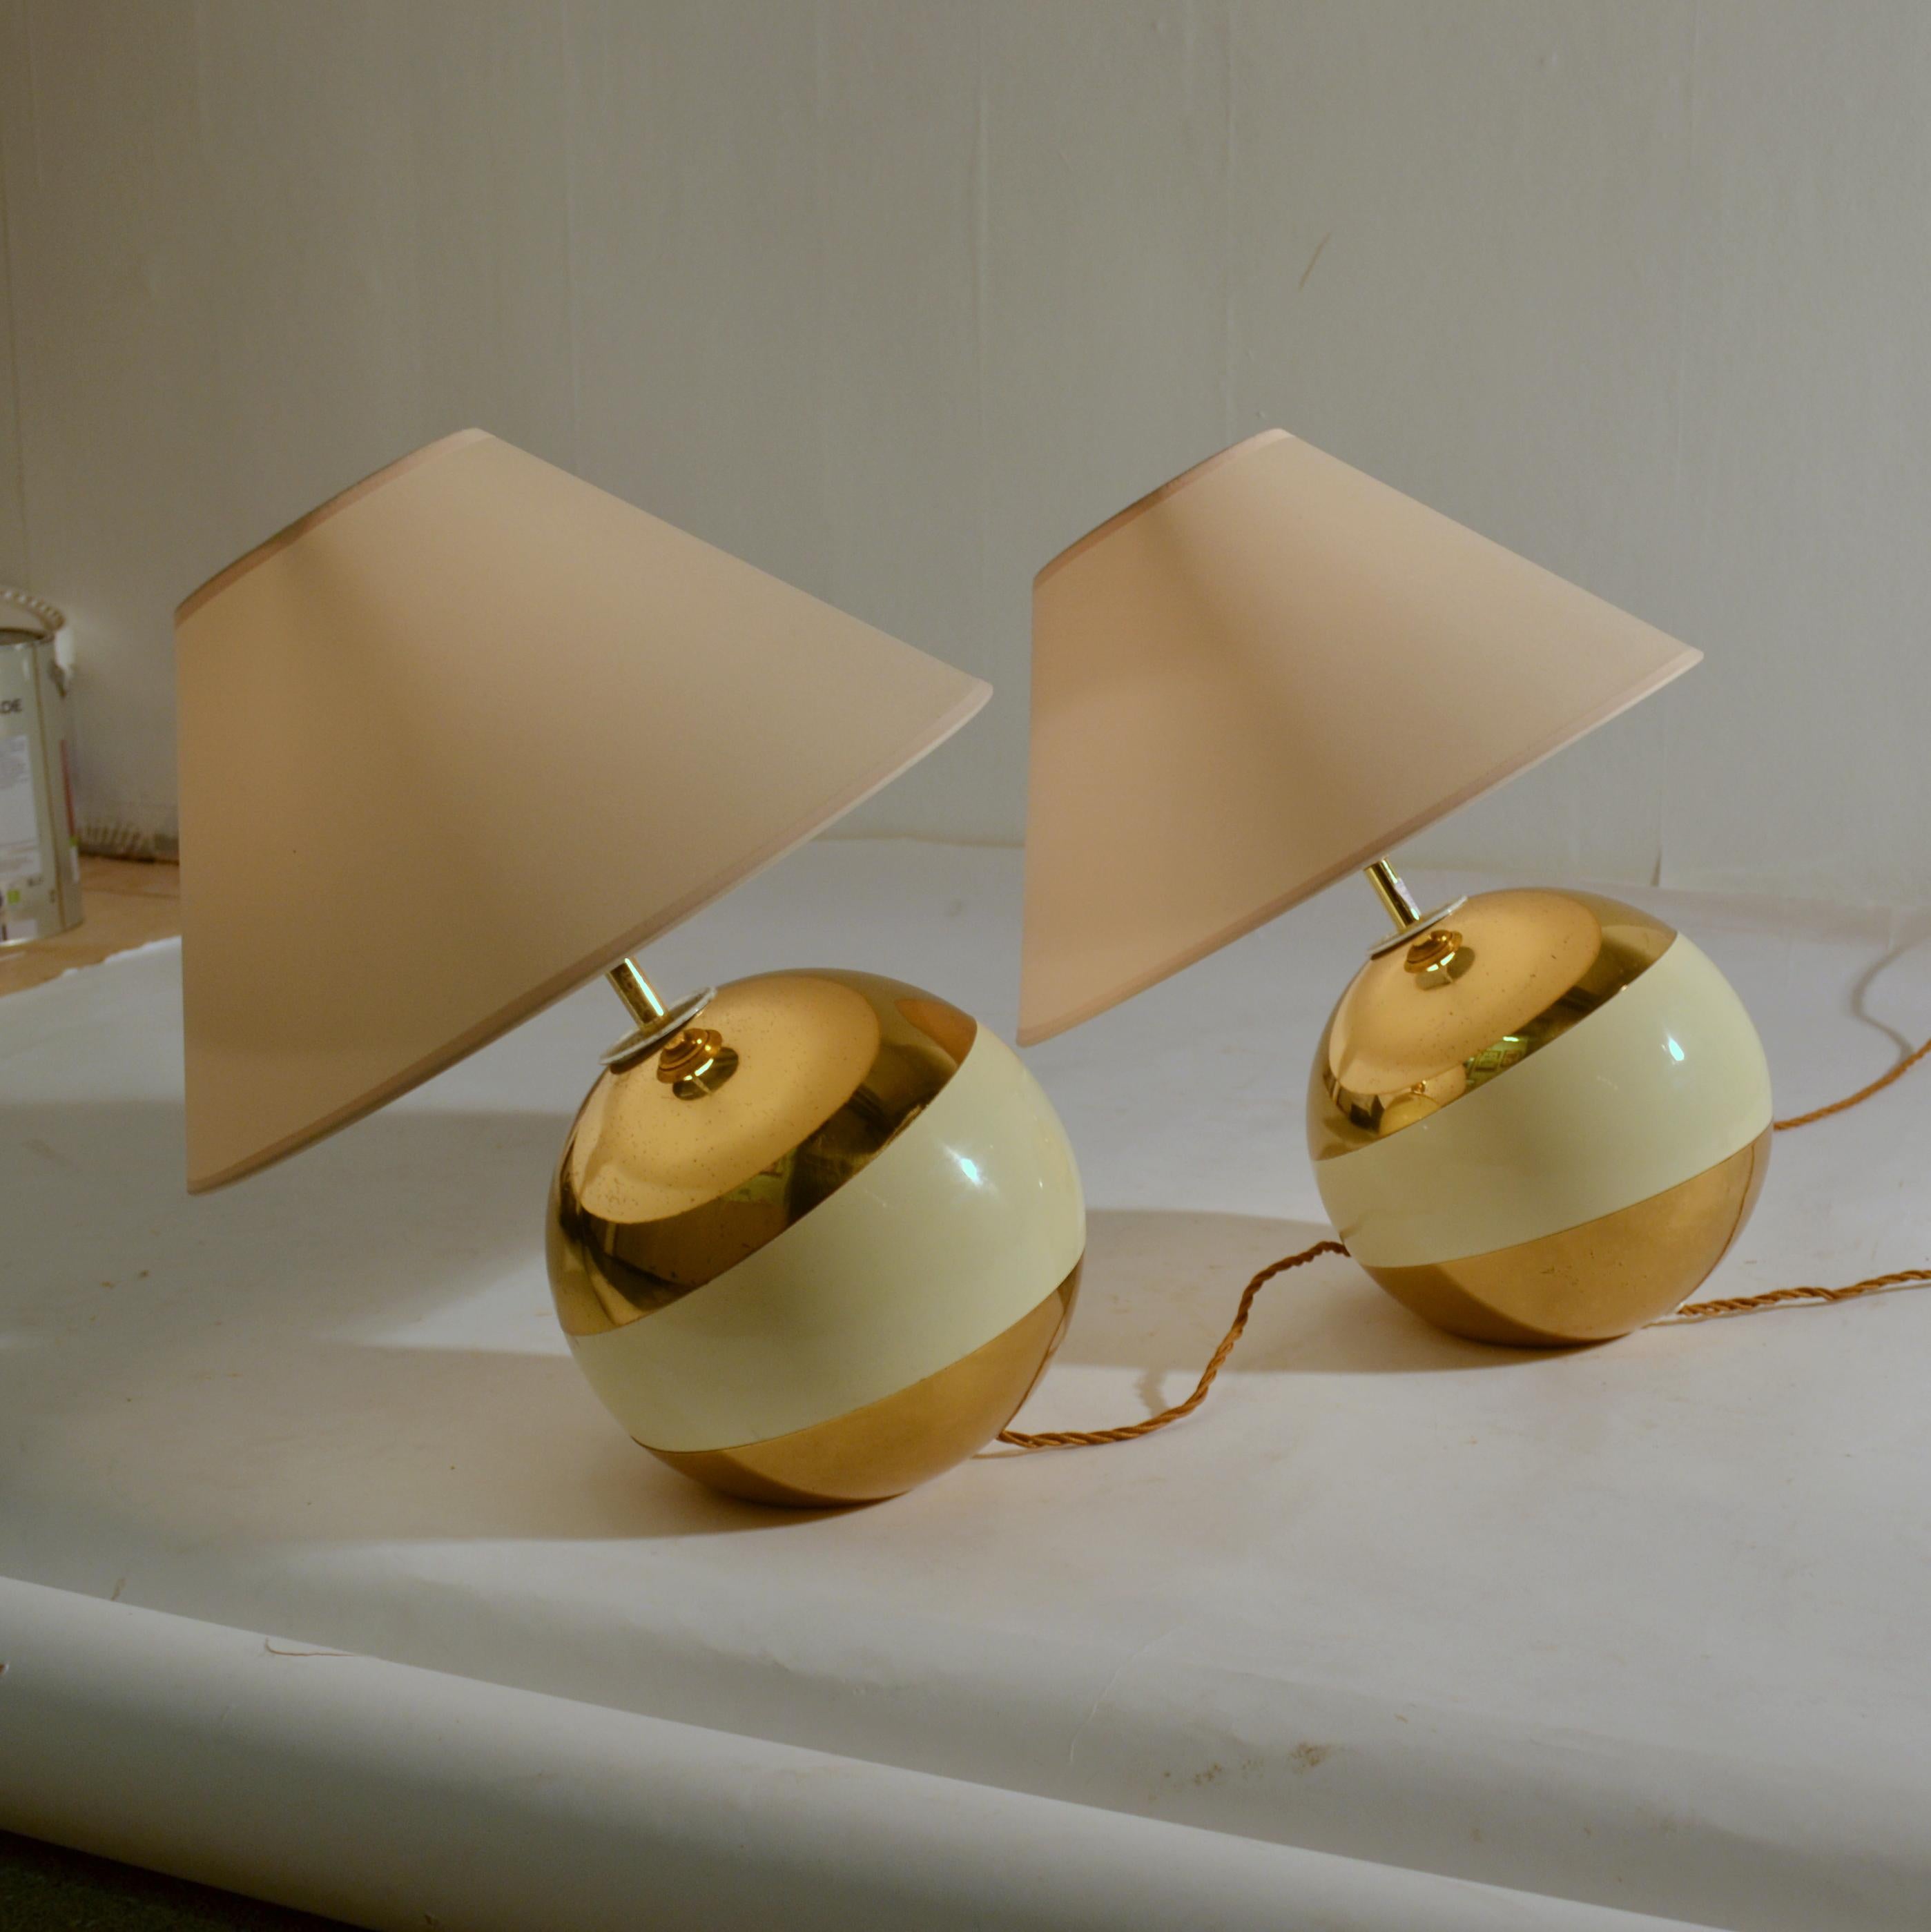 Pair of Italian 1960s leaning ball lamps spun in brass and part enameled with a cream band and cream lamp shades. They can only stand in the leaning position and are great as side table or bedside table lamps. The lampshades are new.

The leaning